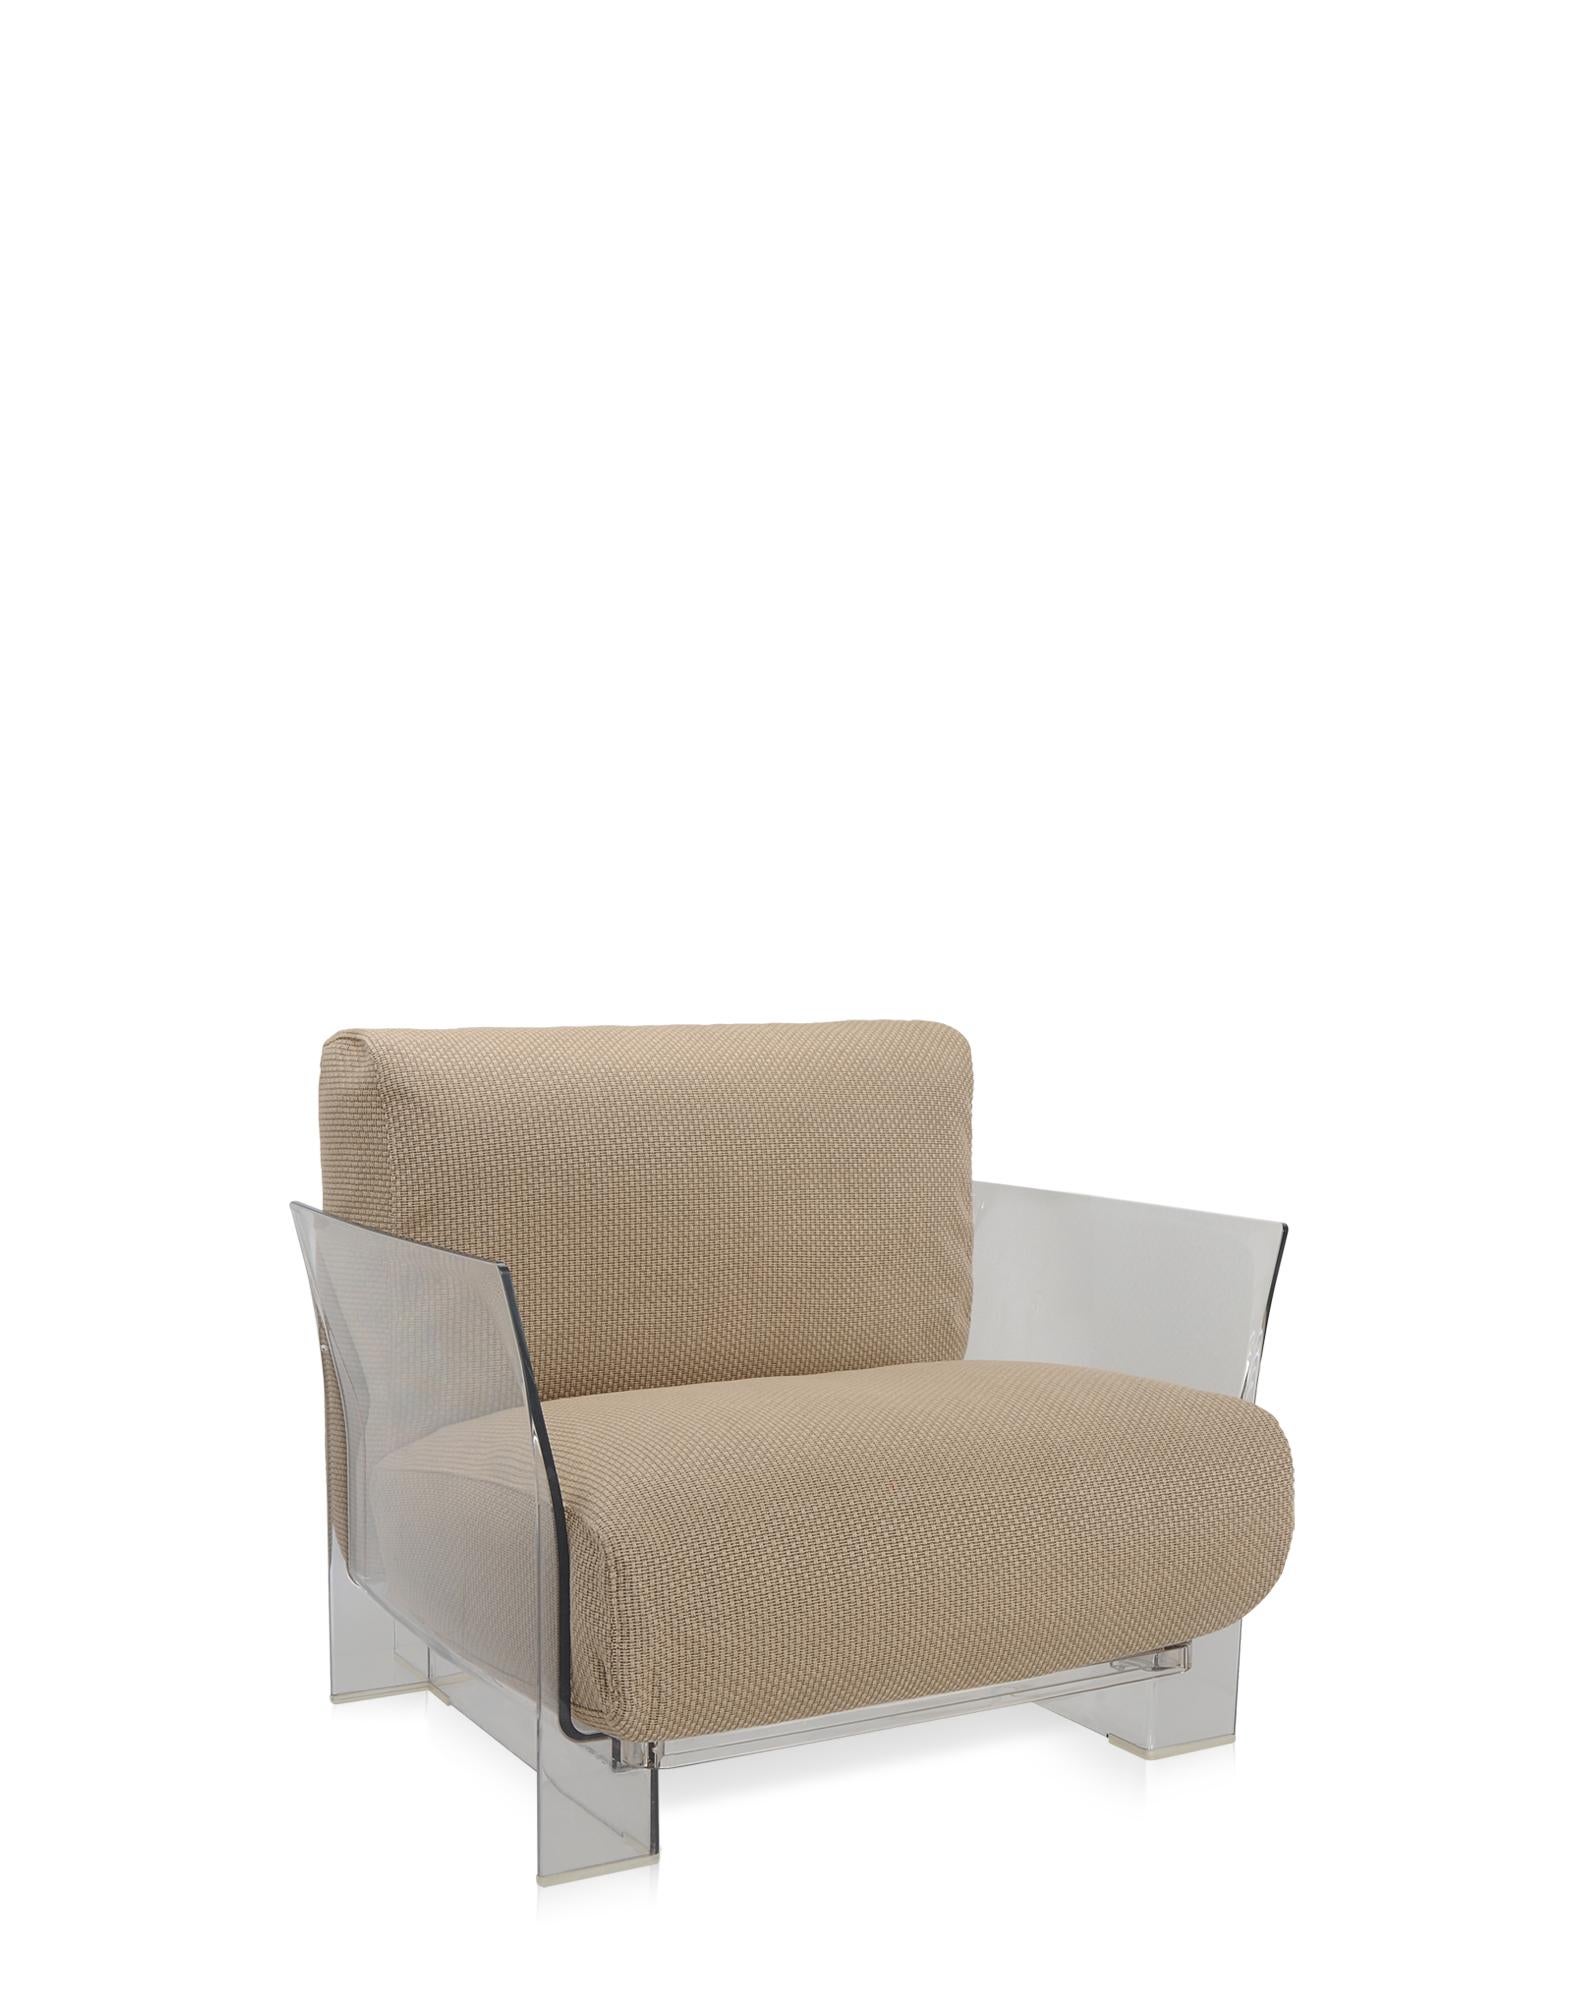 Pop outdoor is the modular sofa with evanescent profiles characterised by large seat and backrest cushions which make it soft and comfortable, made with fabrics conceived specifically for outdoor use. 
The Pop collection is completed by an armchair